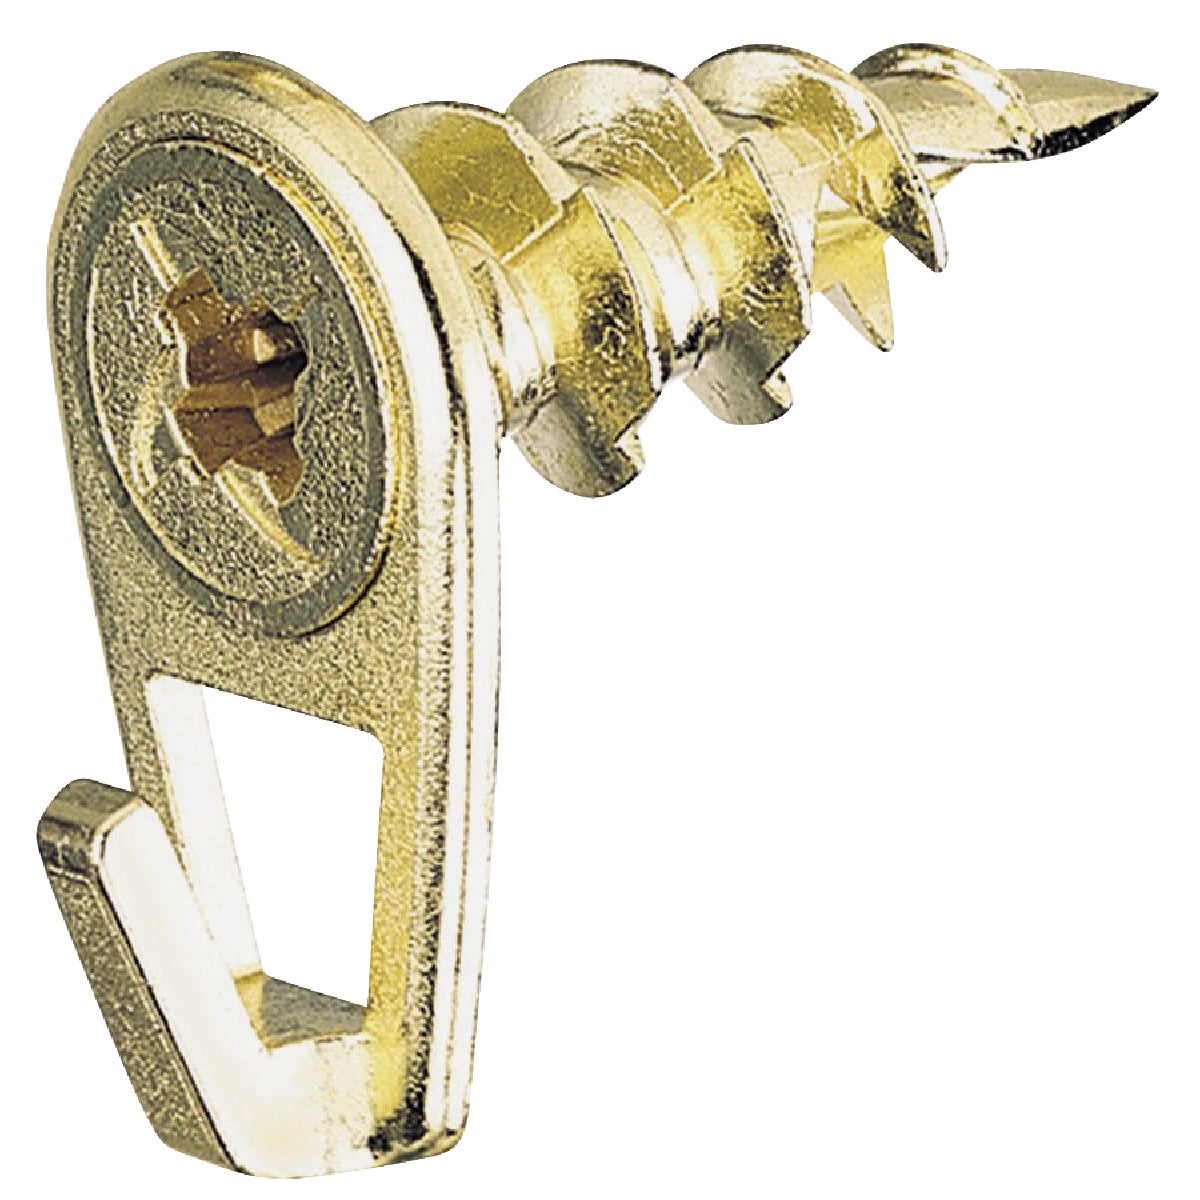 Hillman Anchor Wire 50 Lb. Capacity Brass Self-Drilling Wall Driller Picture Hanger (2 Count)